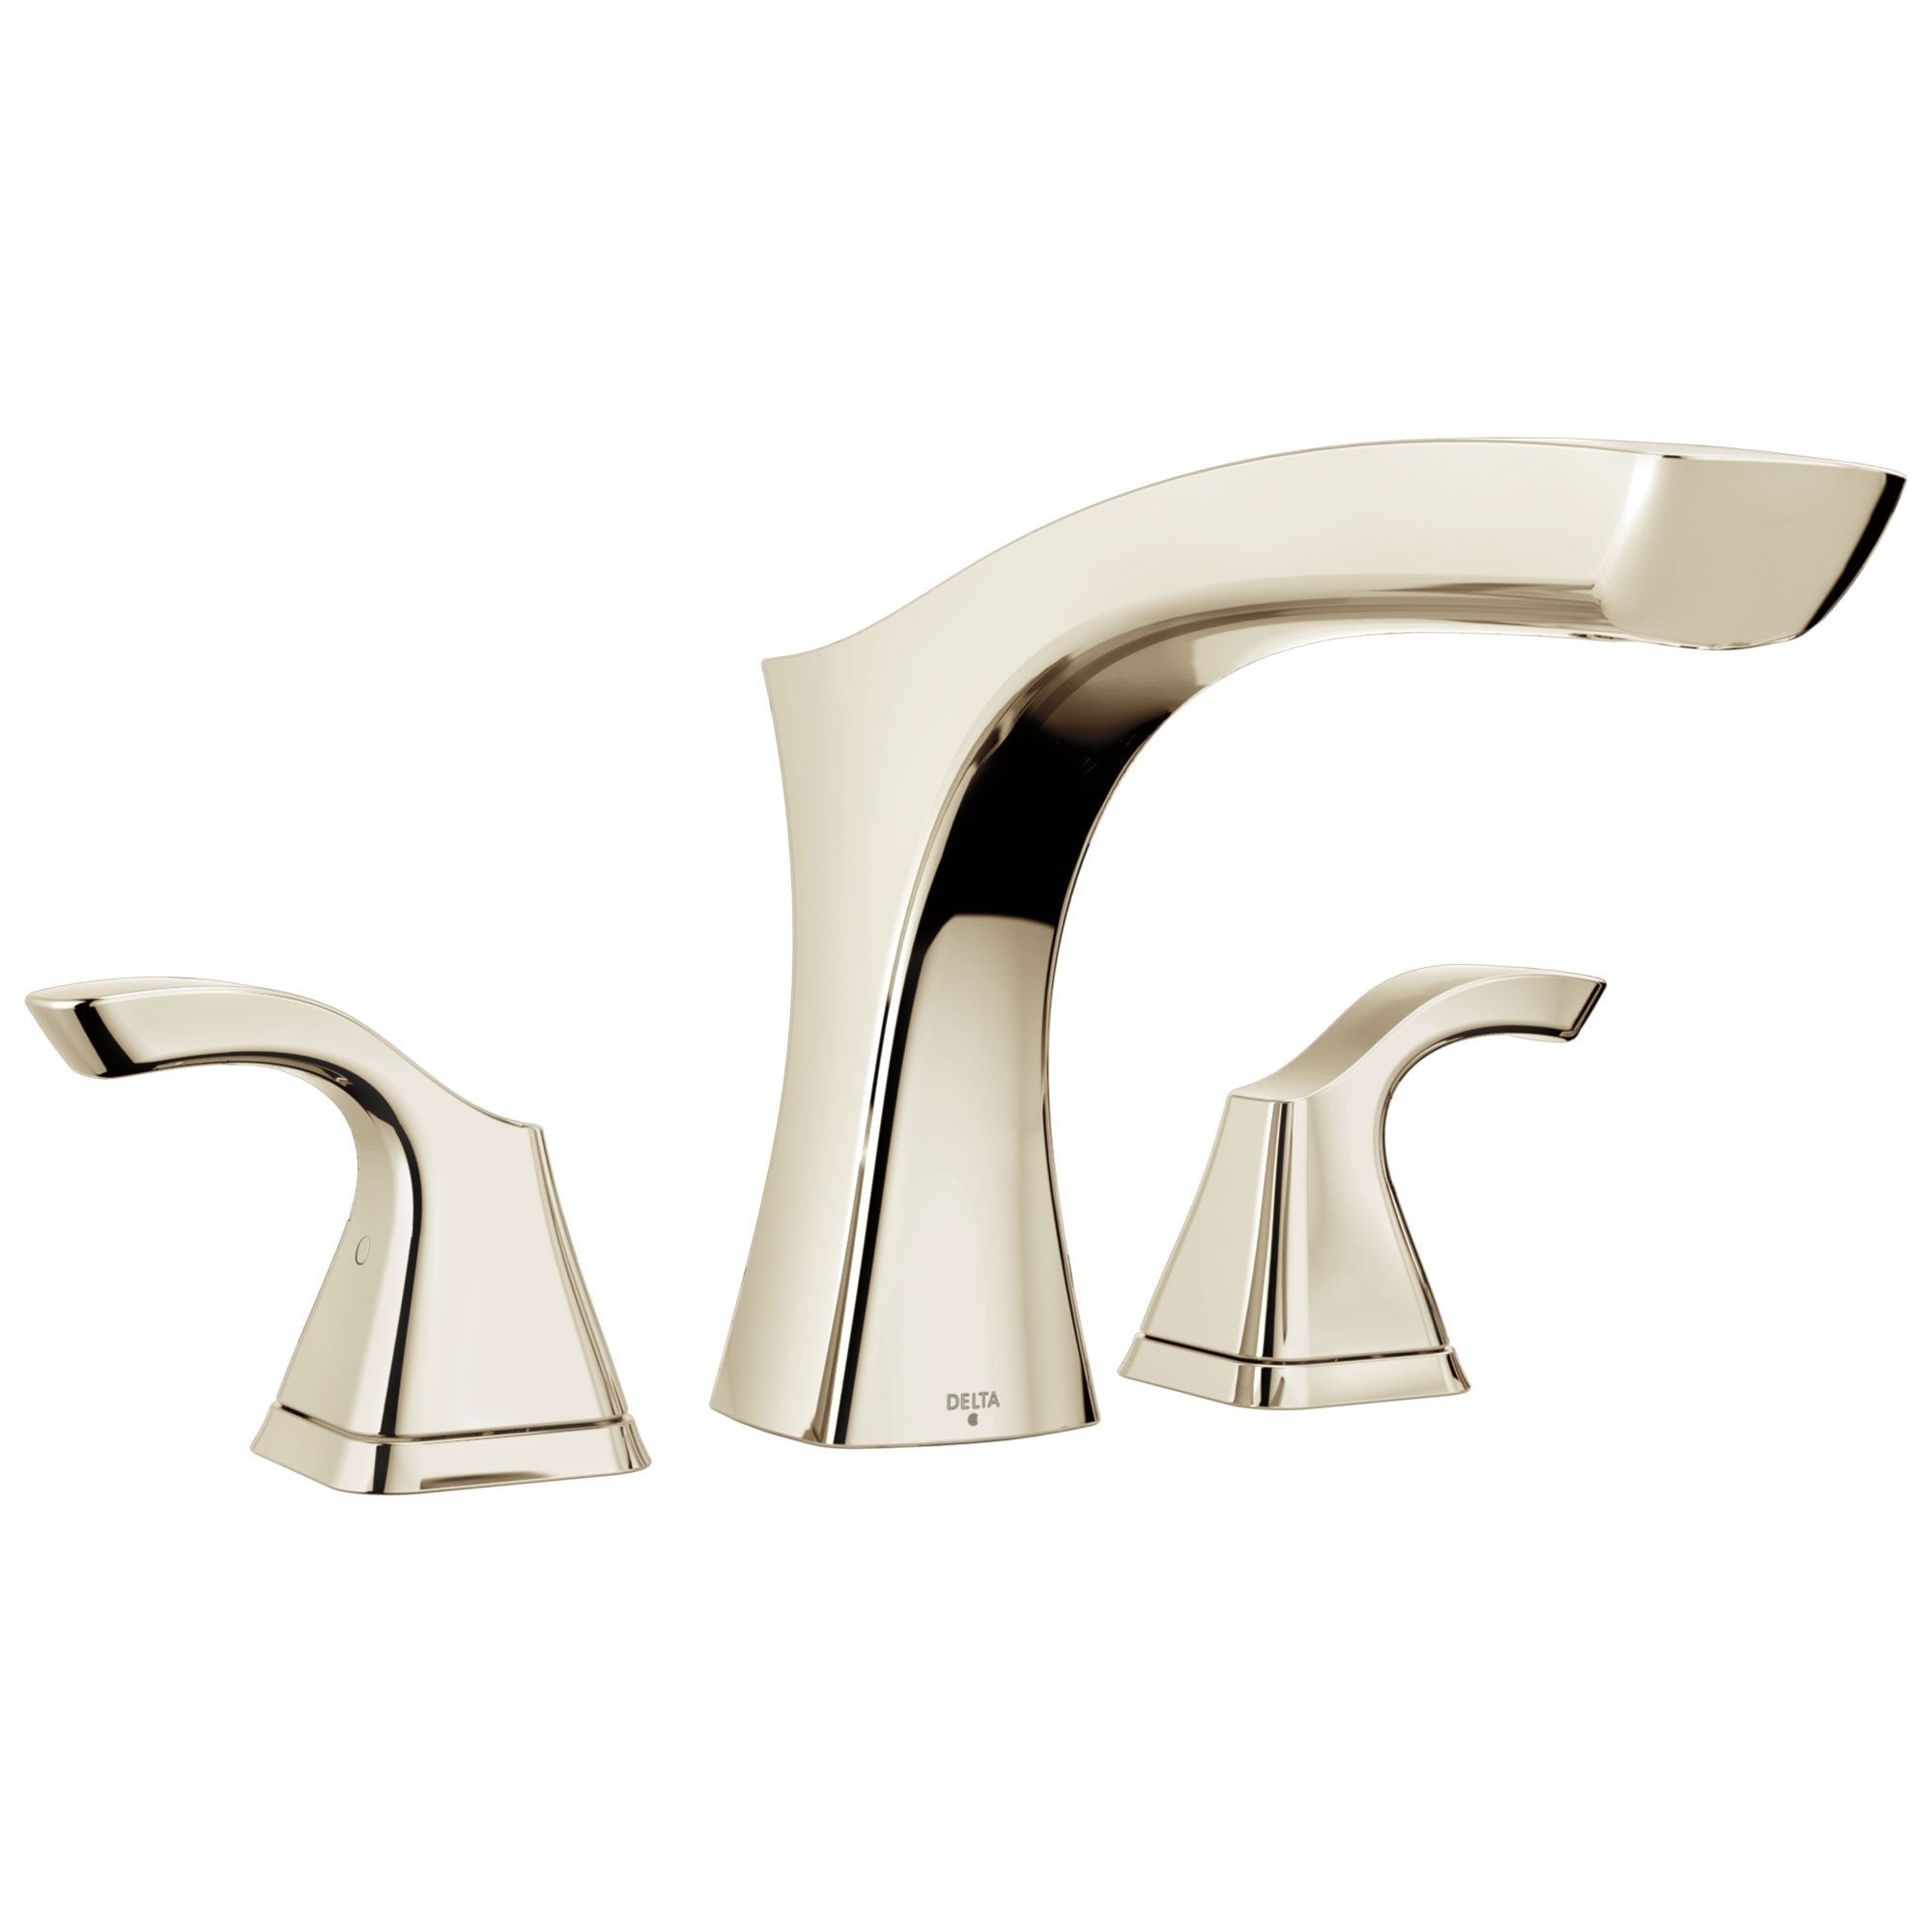 Delta Tesla Collection Polished Nickel Finish Modern Widespread Roman Tub Filler Faucet Trim Kit (Rough-in Valve Sold Separately) 732776